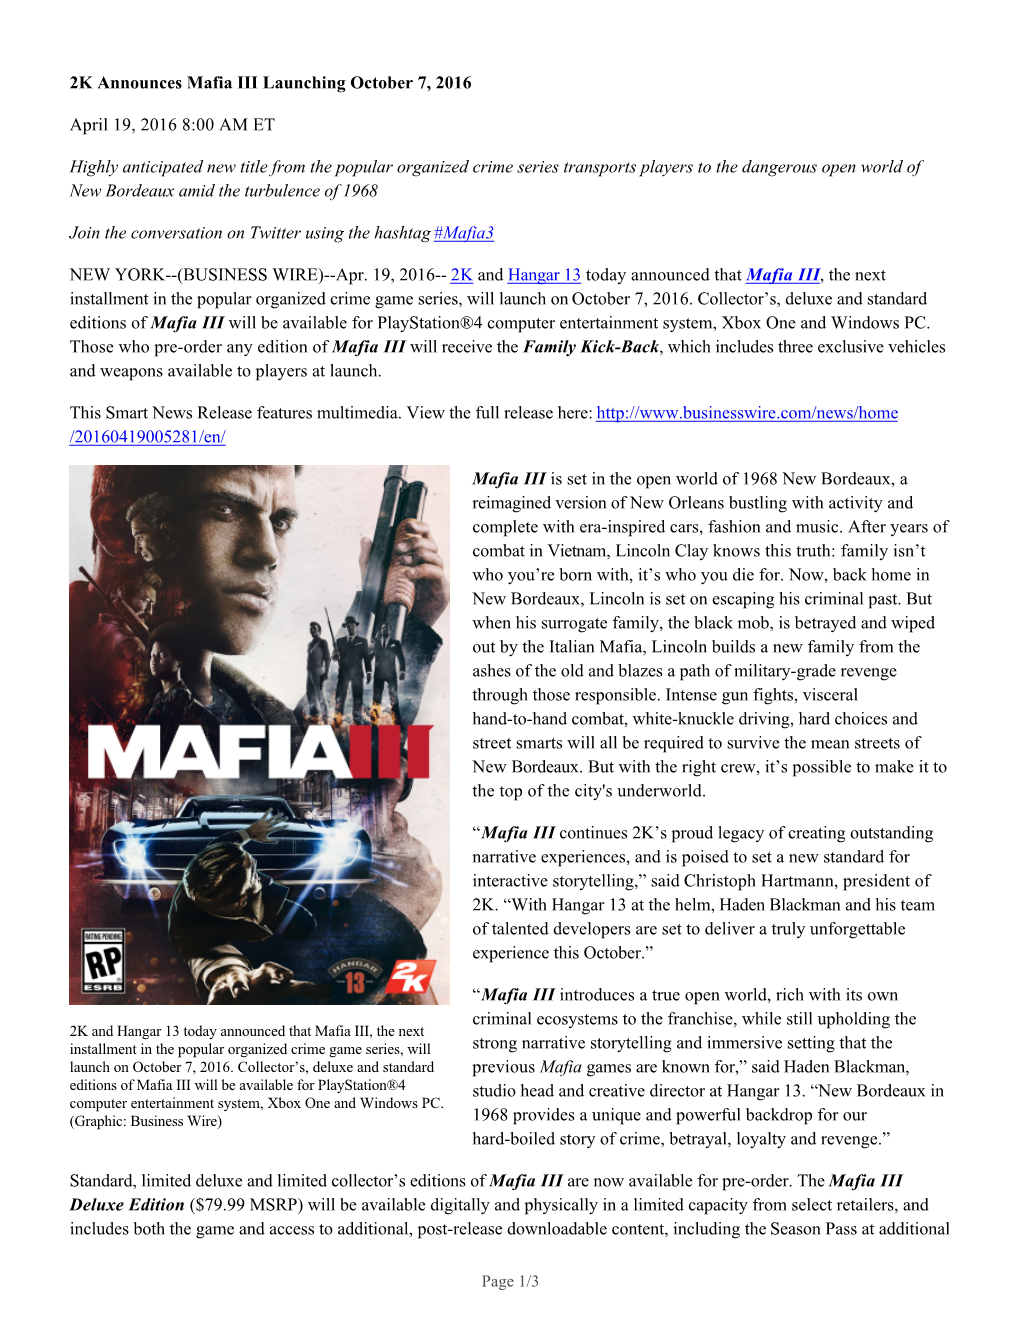 2K Announces Mafia III Launching October 7, 2016 April 19, 2016 8:00 AM ET Highly Anticipated New Title from the Popular Organiz